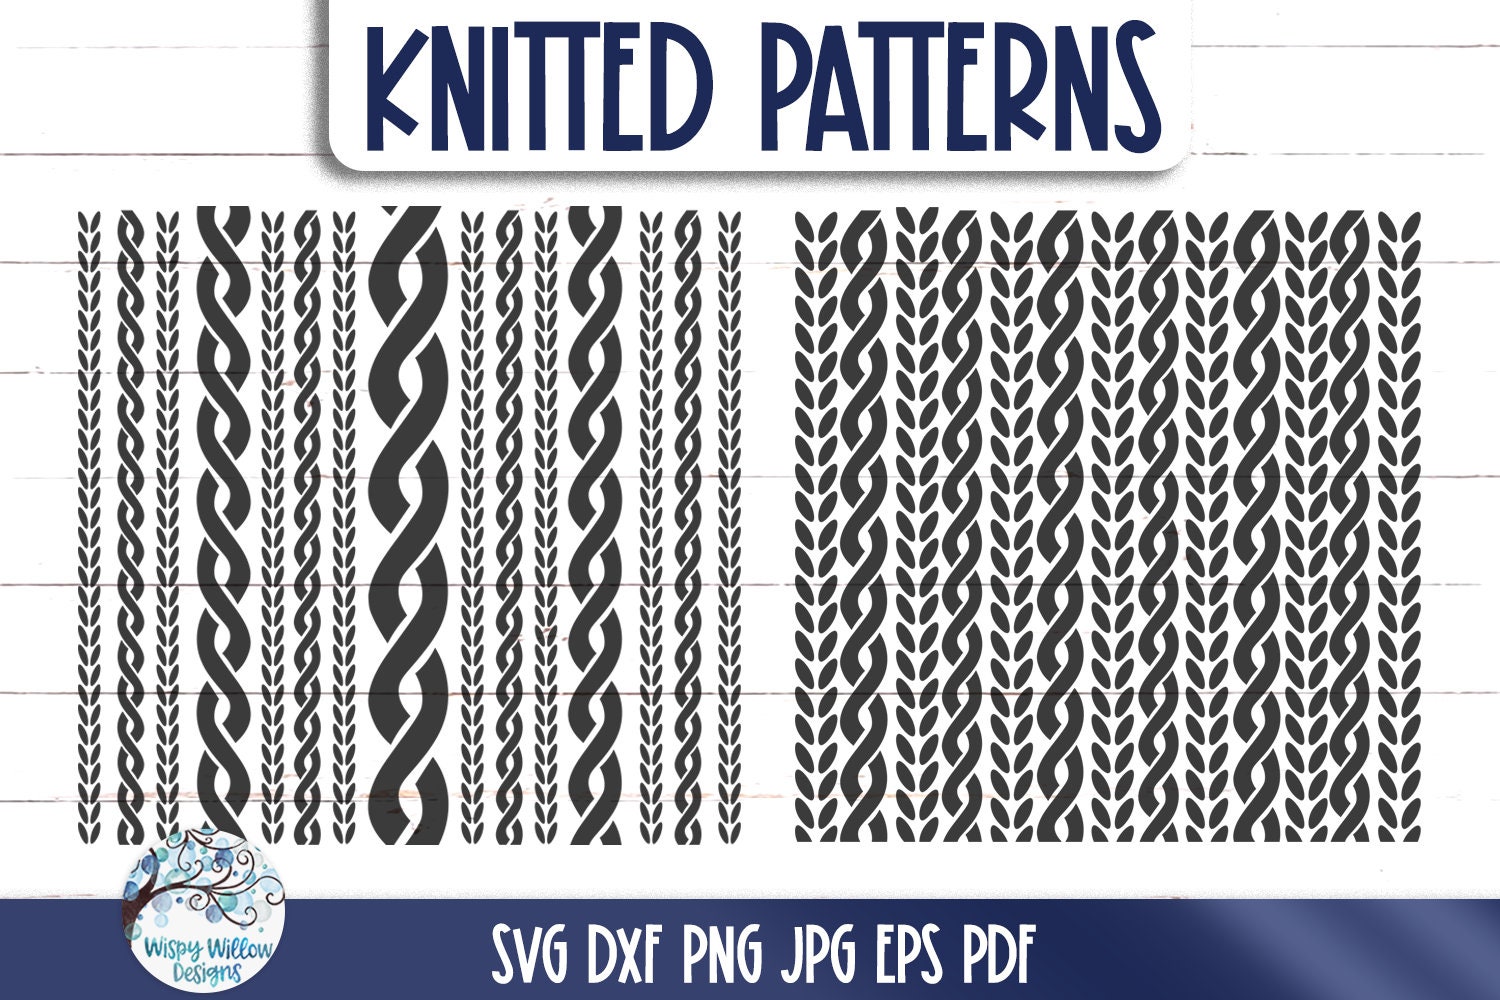 Knitted Pattern SVG Bundle, Knitting Yarn Texture PNG, Cable Stitch Knit  Design, Vinyl Decal File for Cricut and Silhouette -  Canada